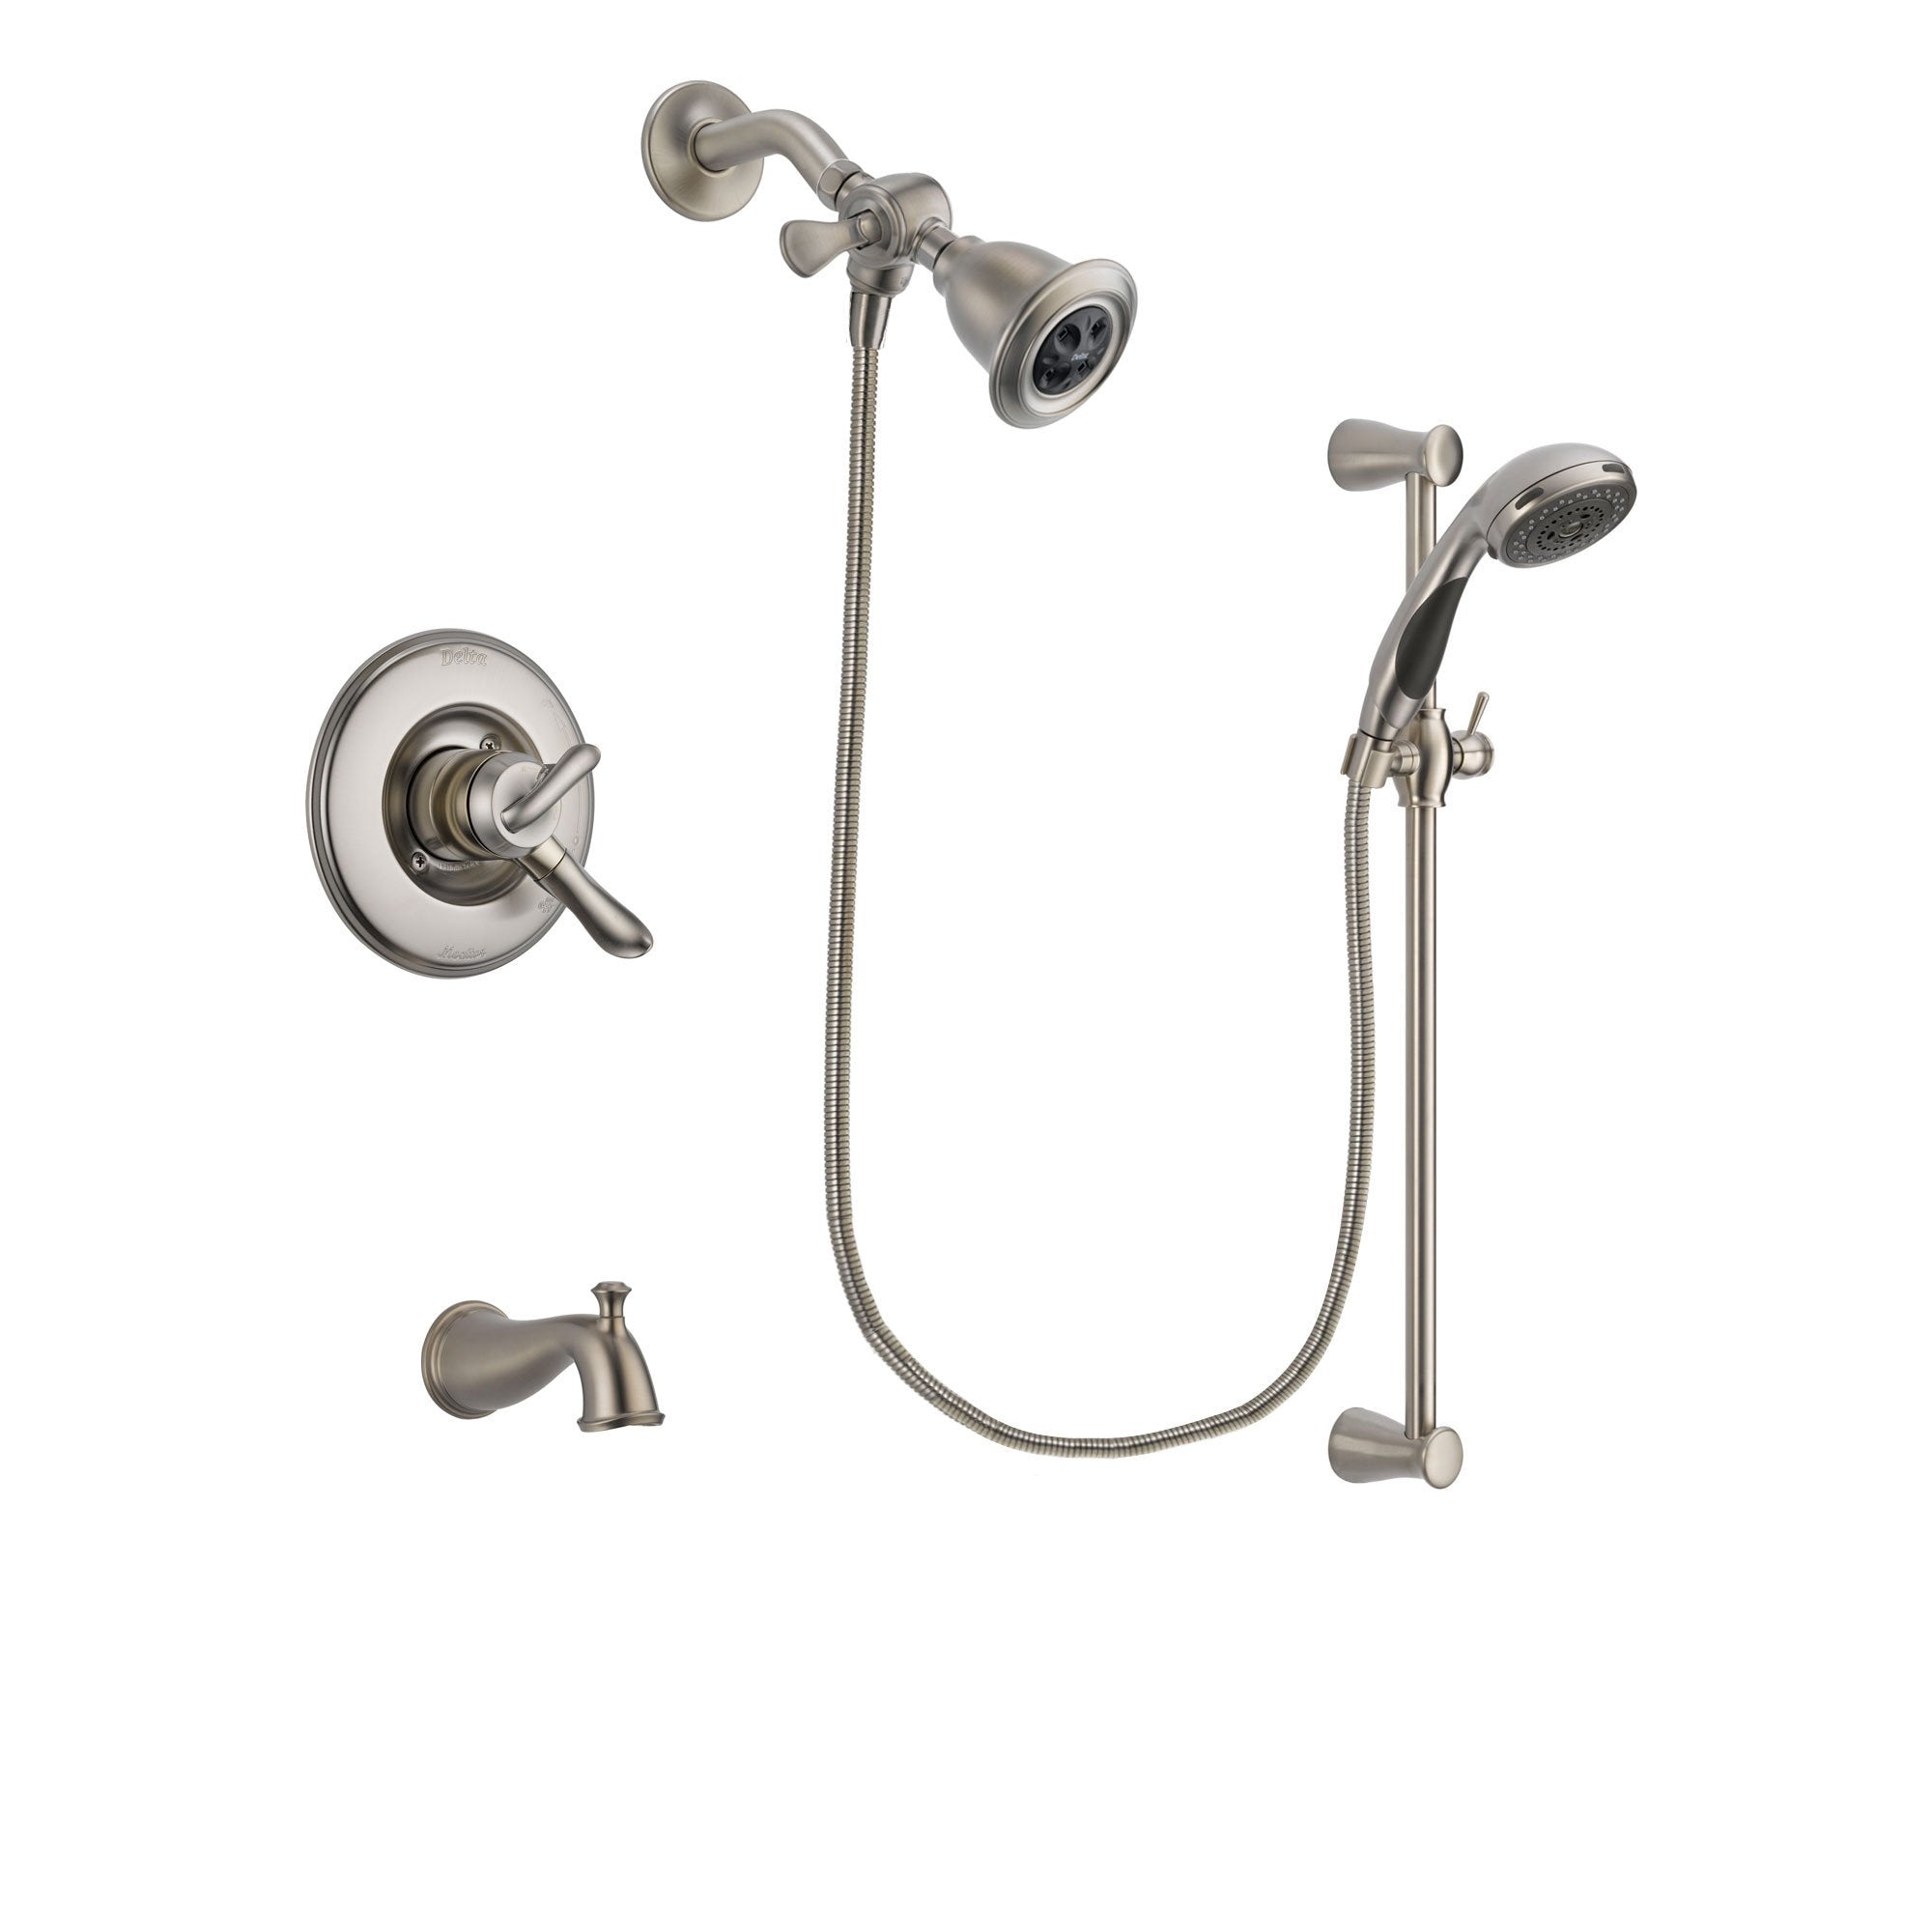 Delta Linden Stainless Steel Finish Dual Control Tub and Shower Faucet System Package with Water Efficient Showerhead and Handheld Shower Spray with Slide Bar Includes Rough-in Valve and Tub Spout DSP1577V